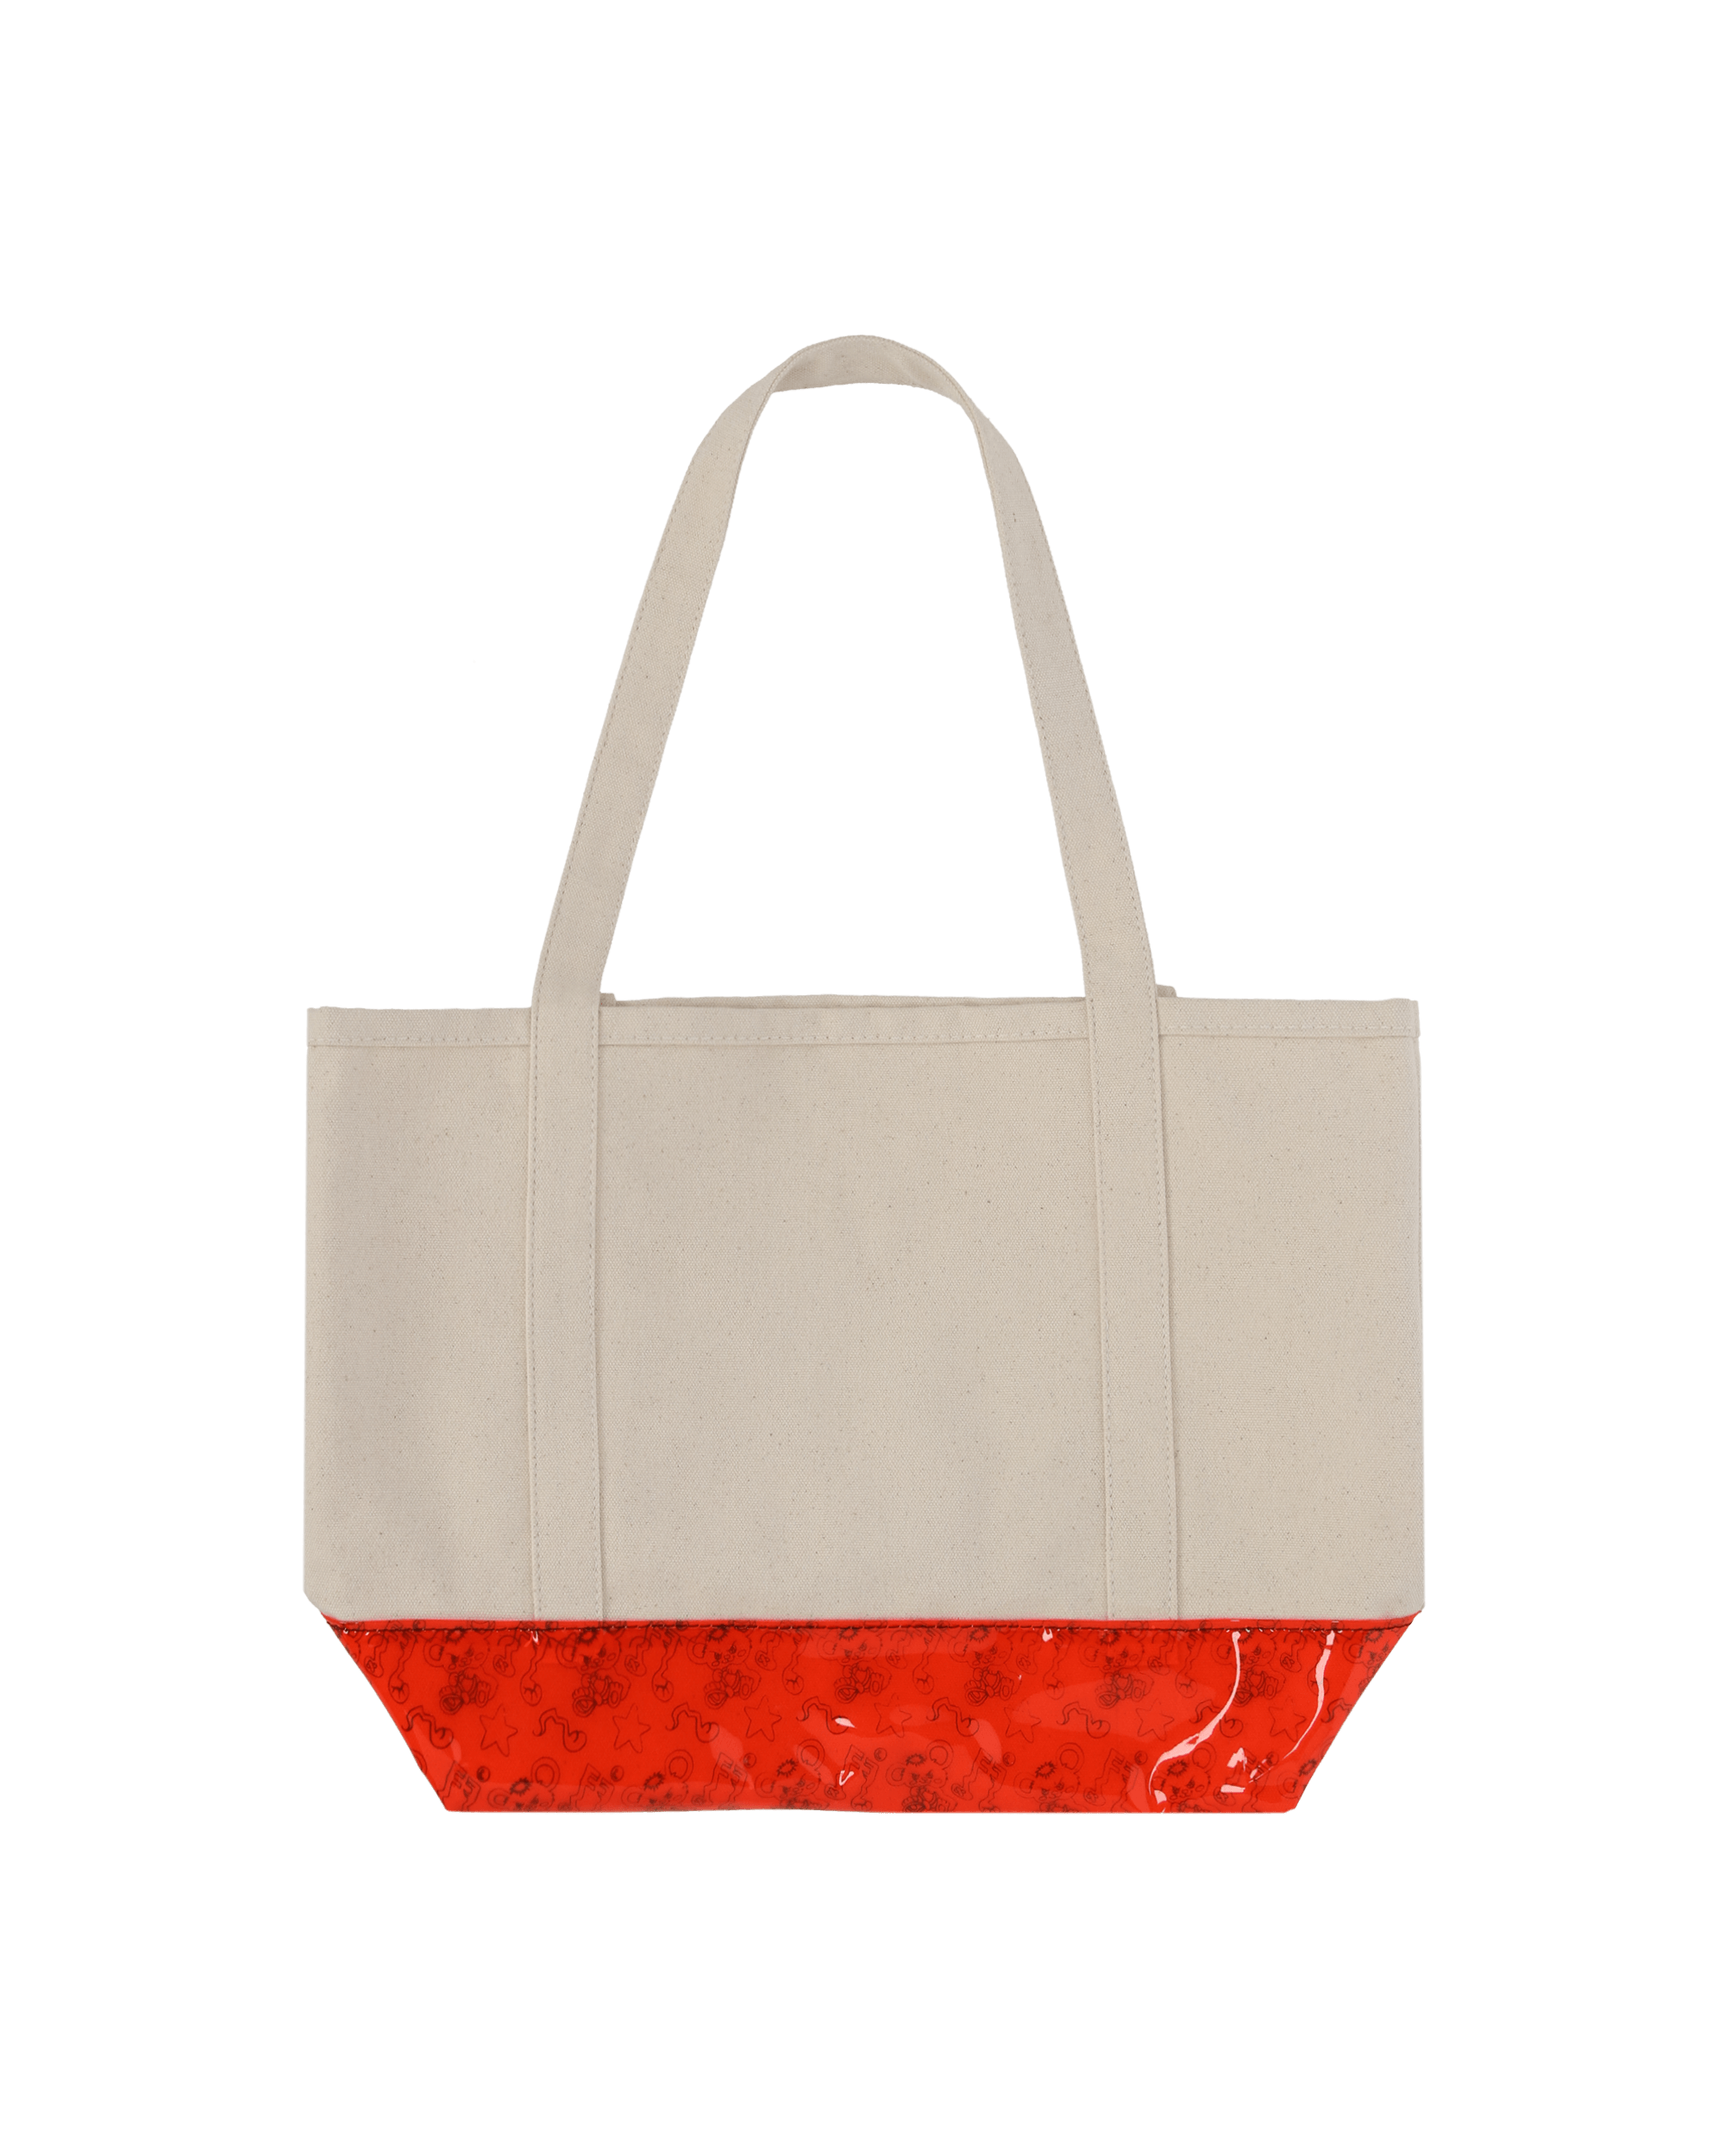 Lqqk Lqqk Tote Heavy Duty Canvas Screen Printed With Vinyl Bottom Made In Usa Canvas/Vinyl Bags and Backpacks Tote AW21LQQKTOTE001 001